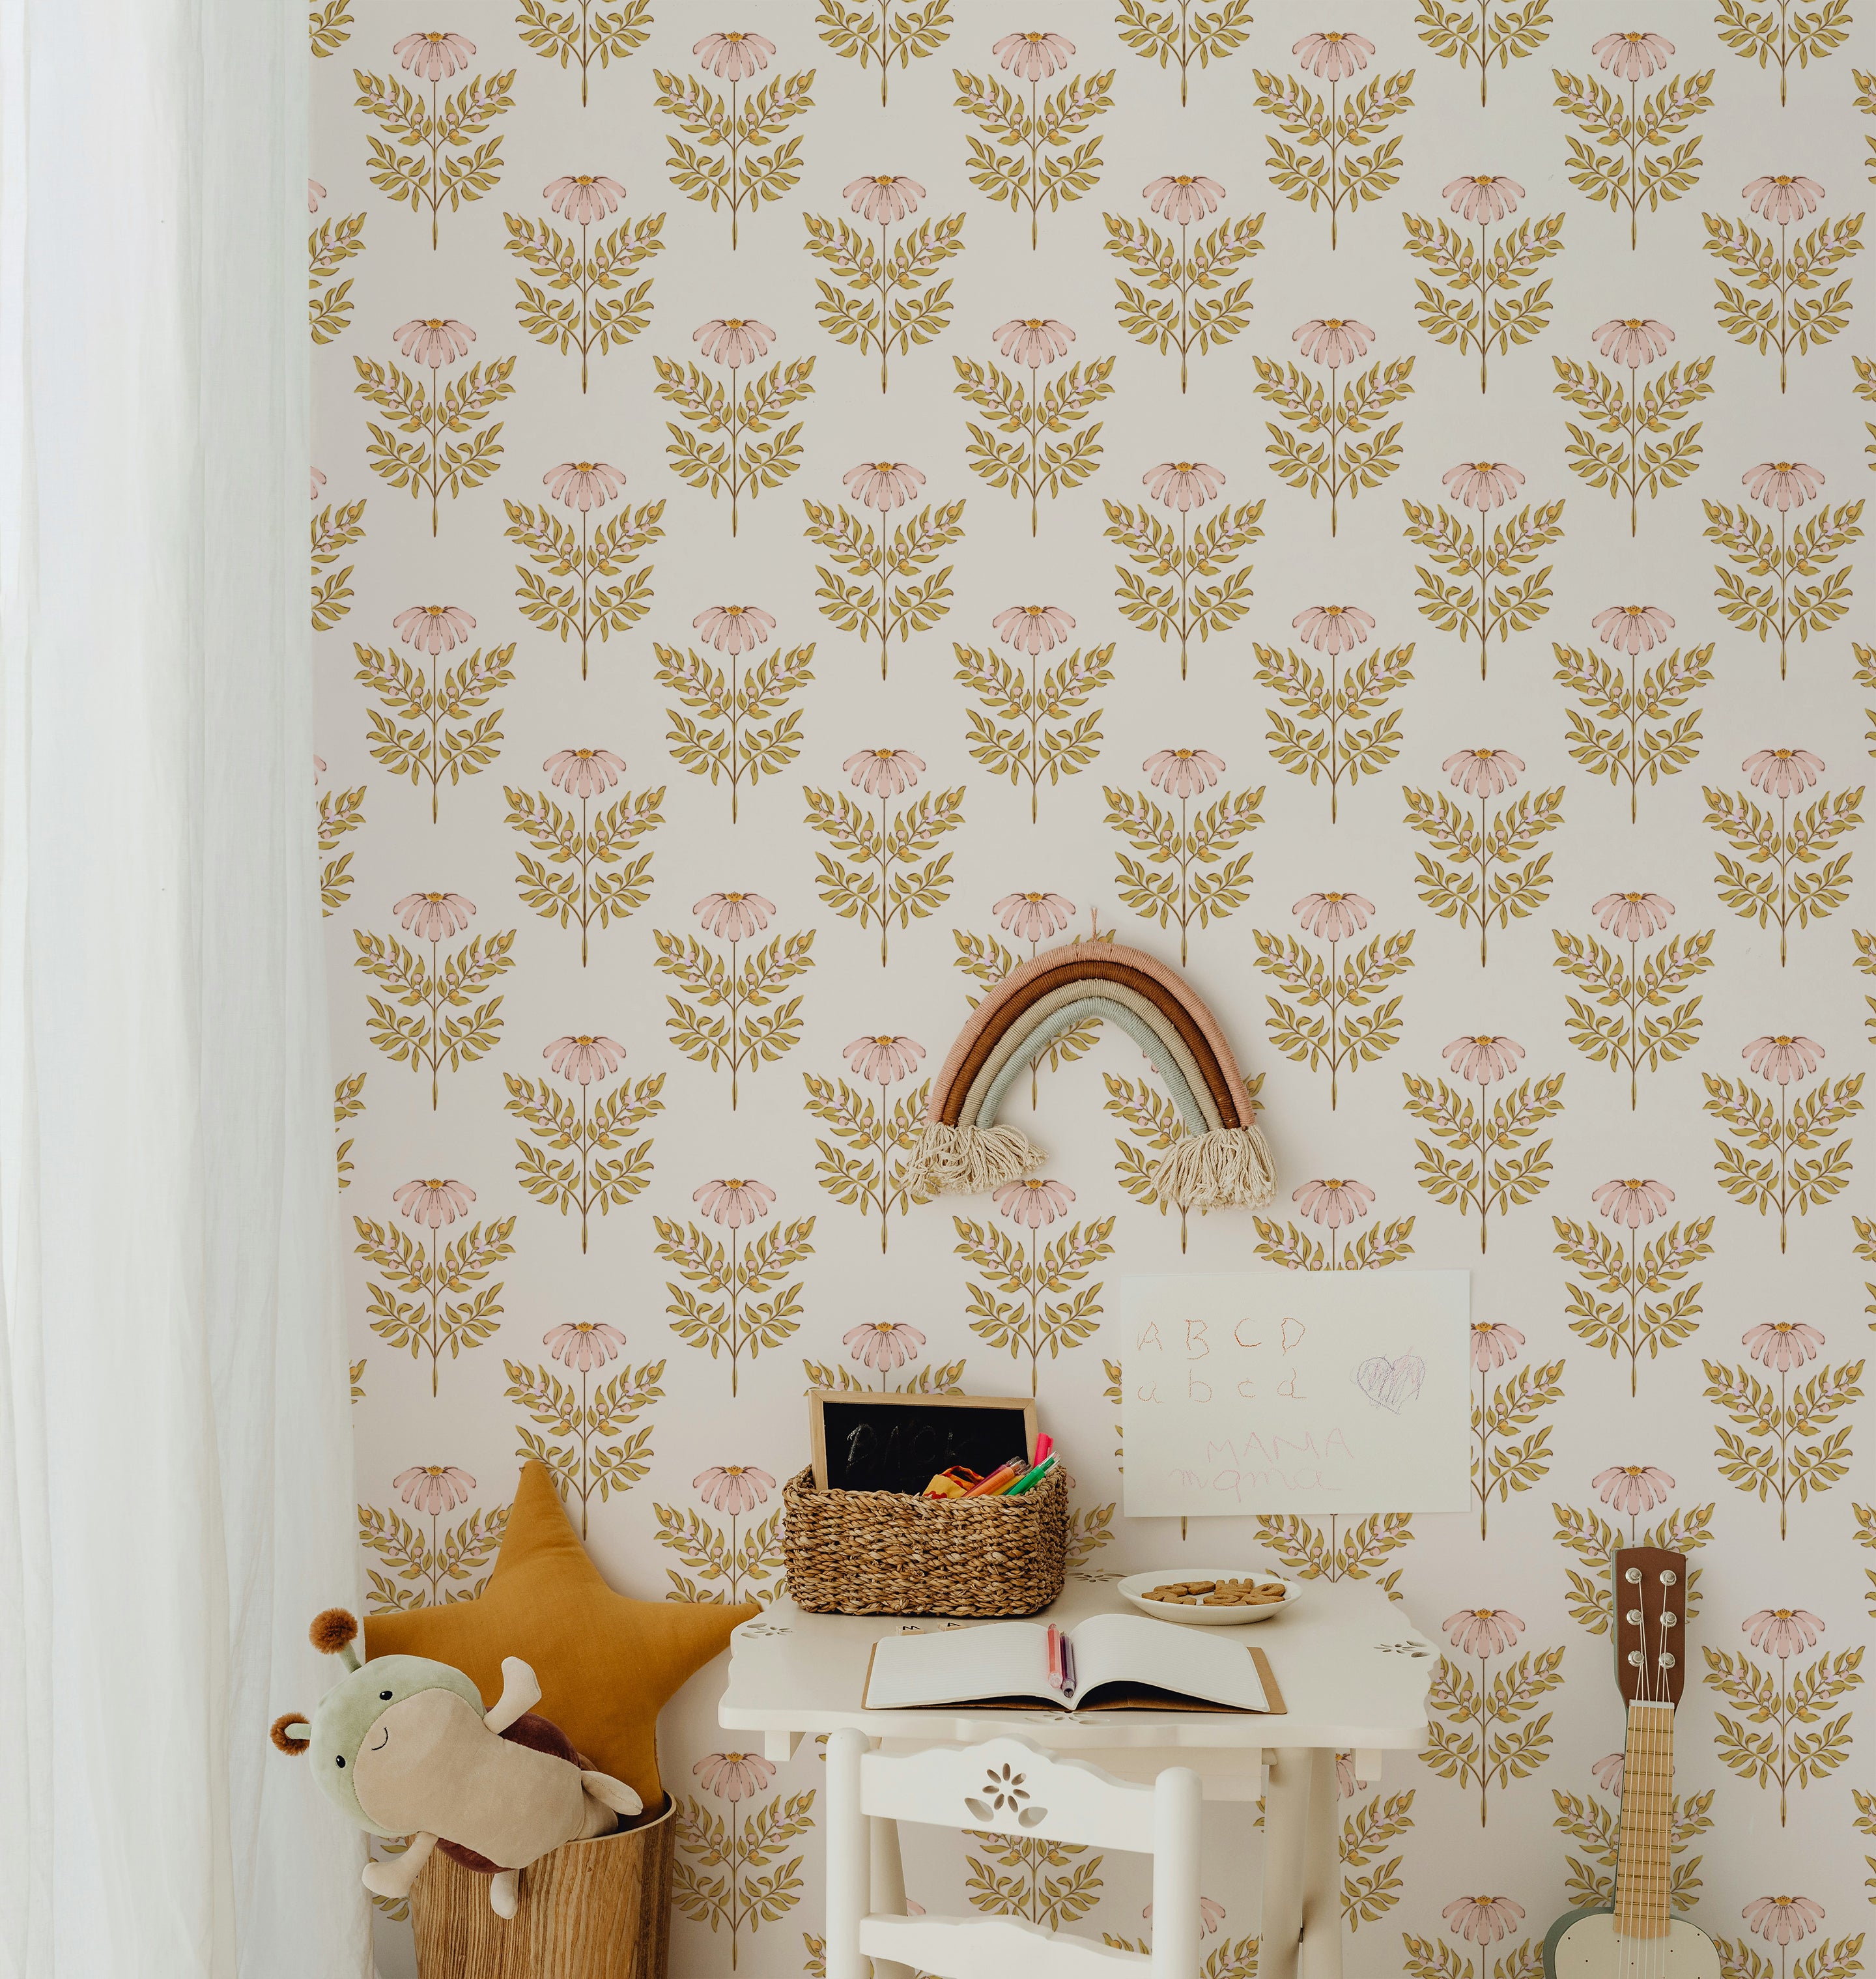 A charming children's study area enhanced by the Ditsy Daisy Wallpaper, featuring pink floral motifs and golden leaves on a soft background. The space is equipped with a small white desk, colorful children’s books, and playful decor, fostering a creative and cheerful learning environment.